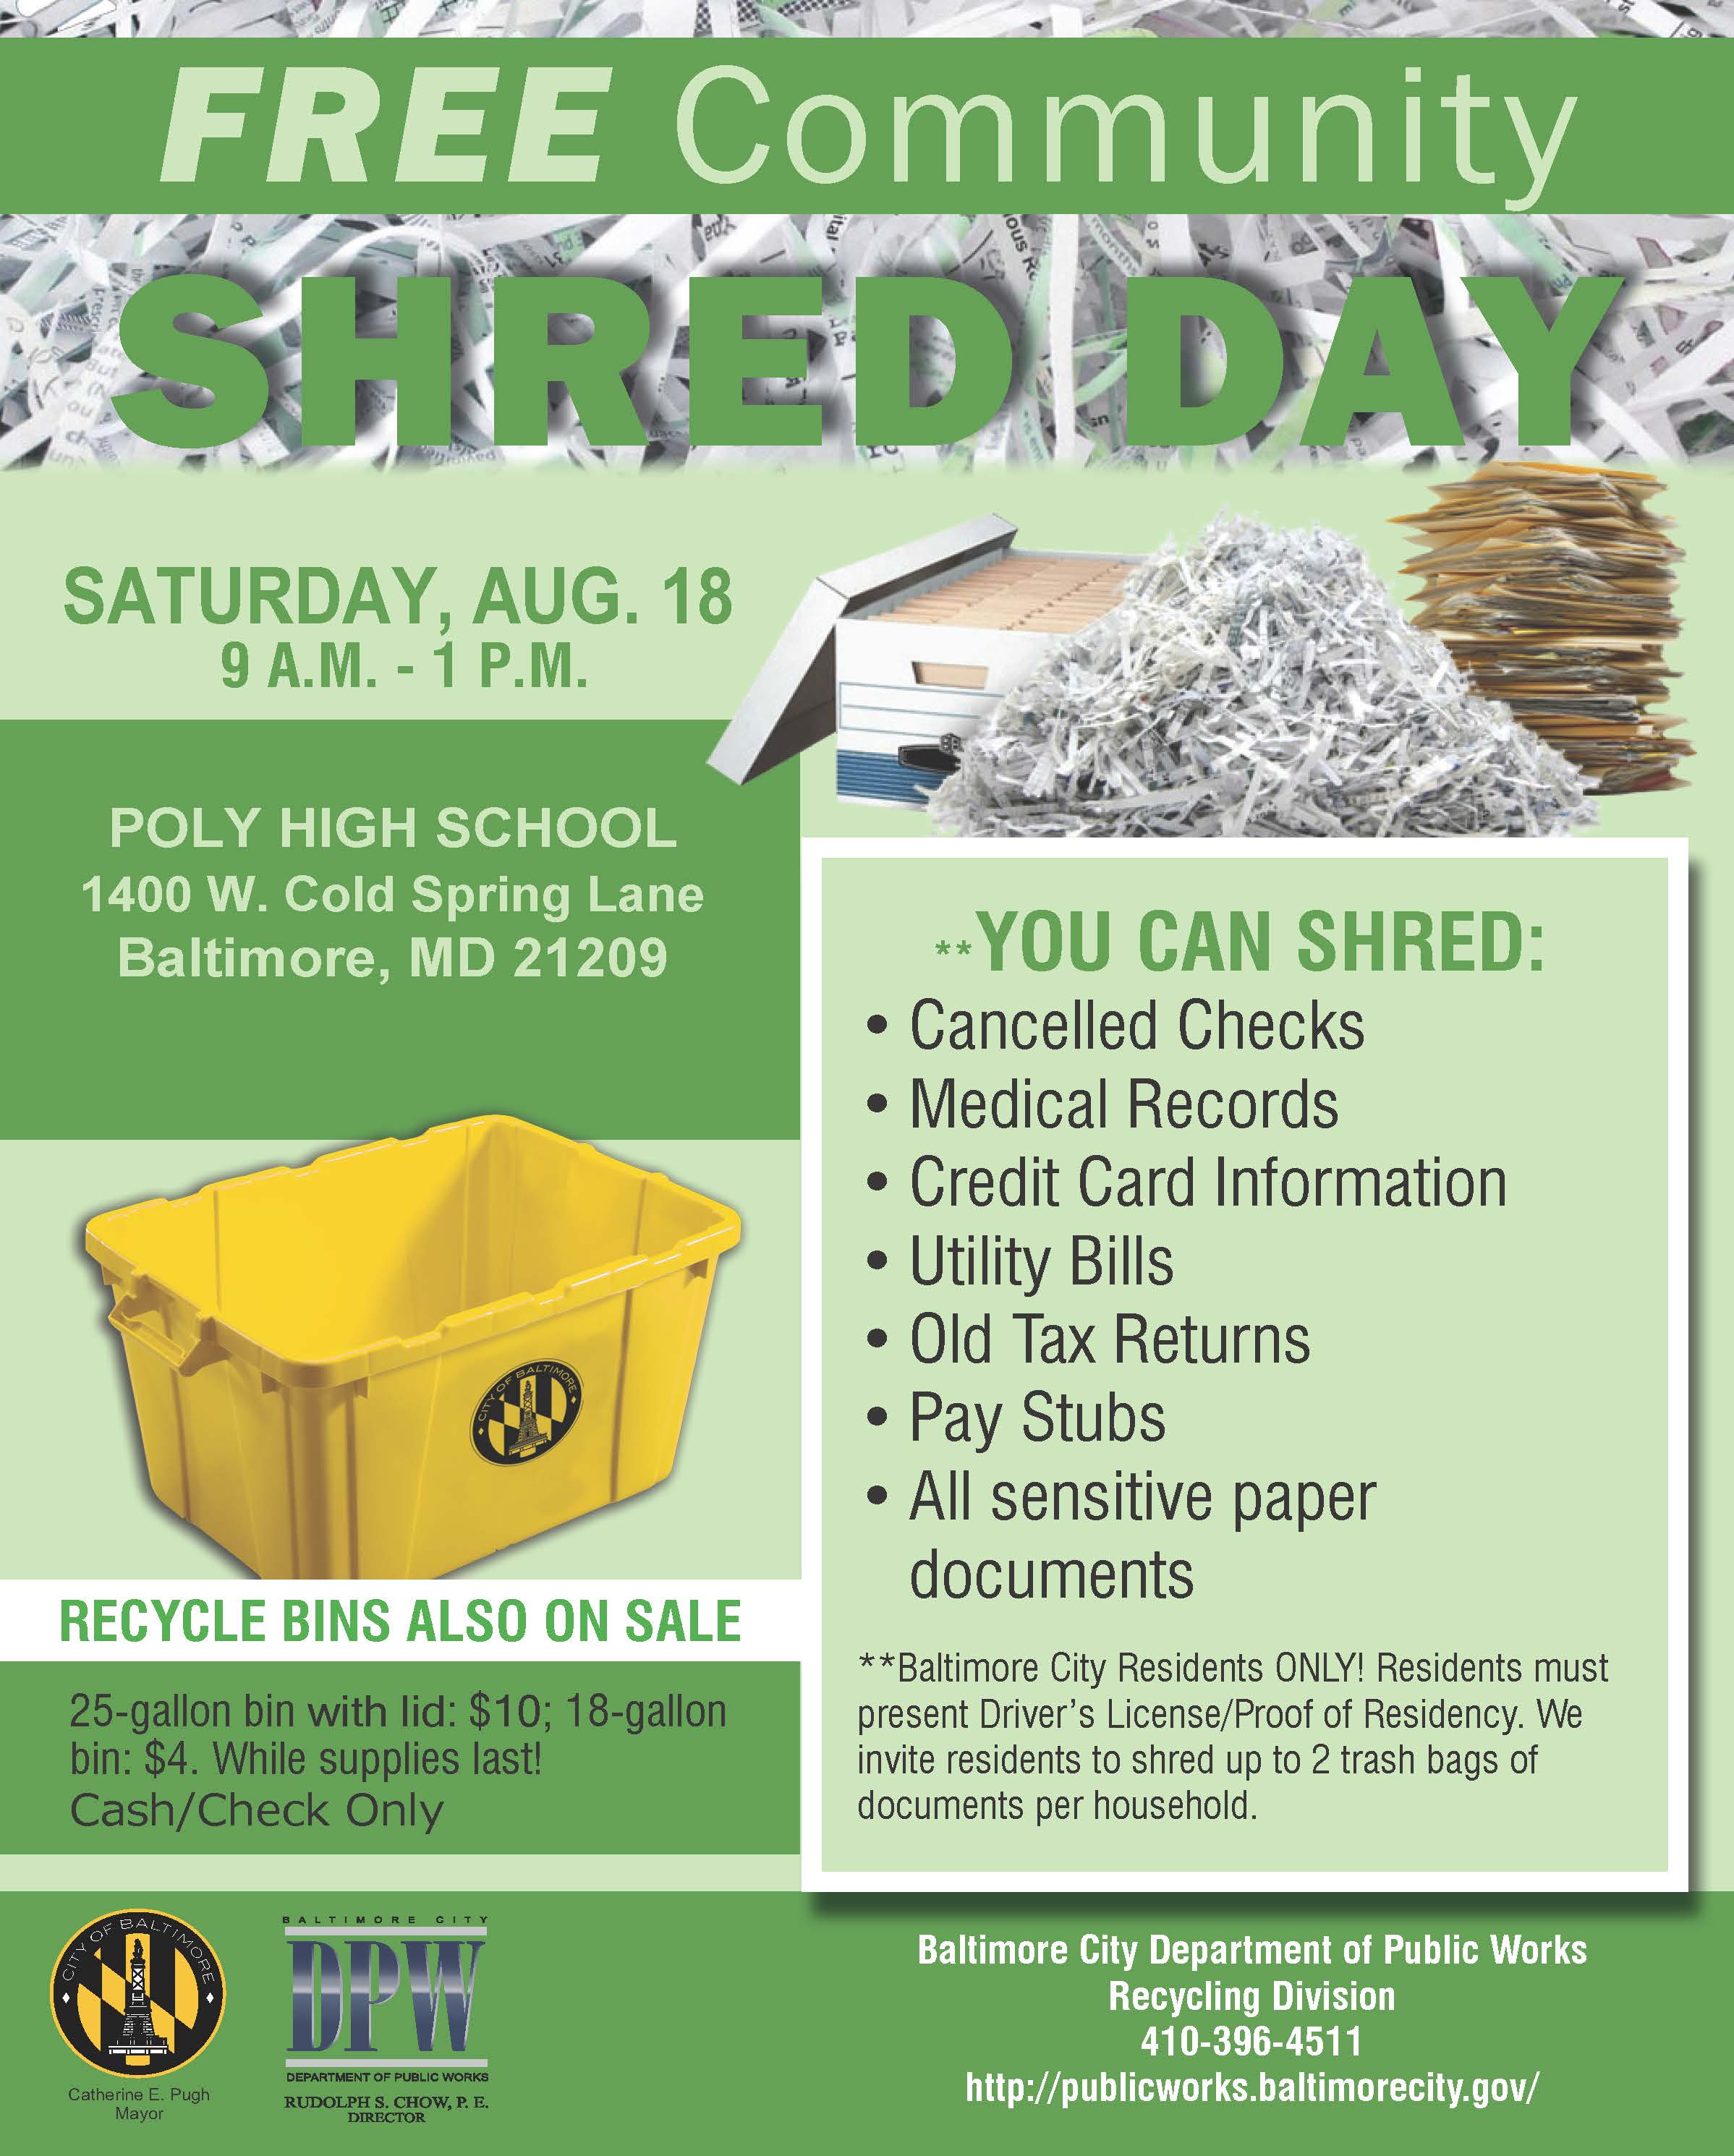 Free Community Shred Day Baltimore City Department of Public Works